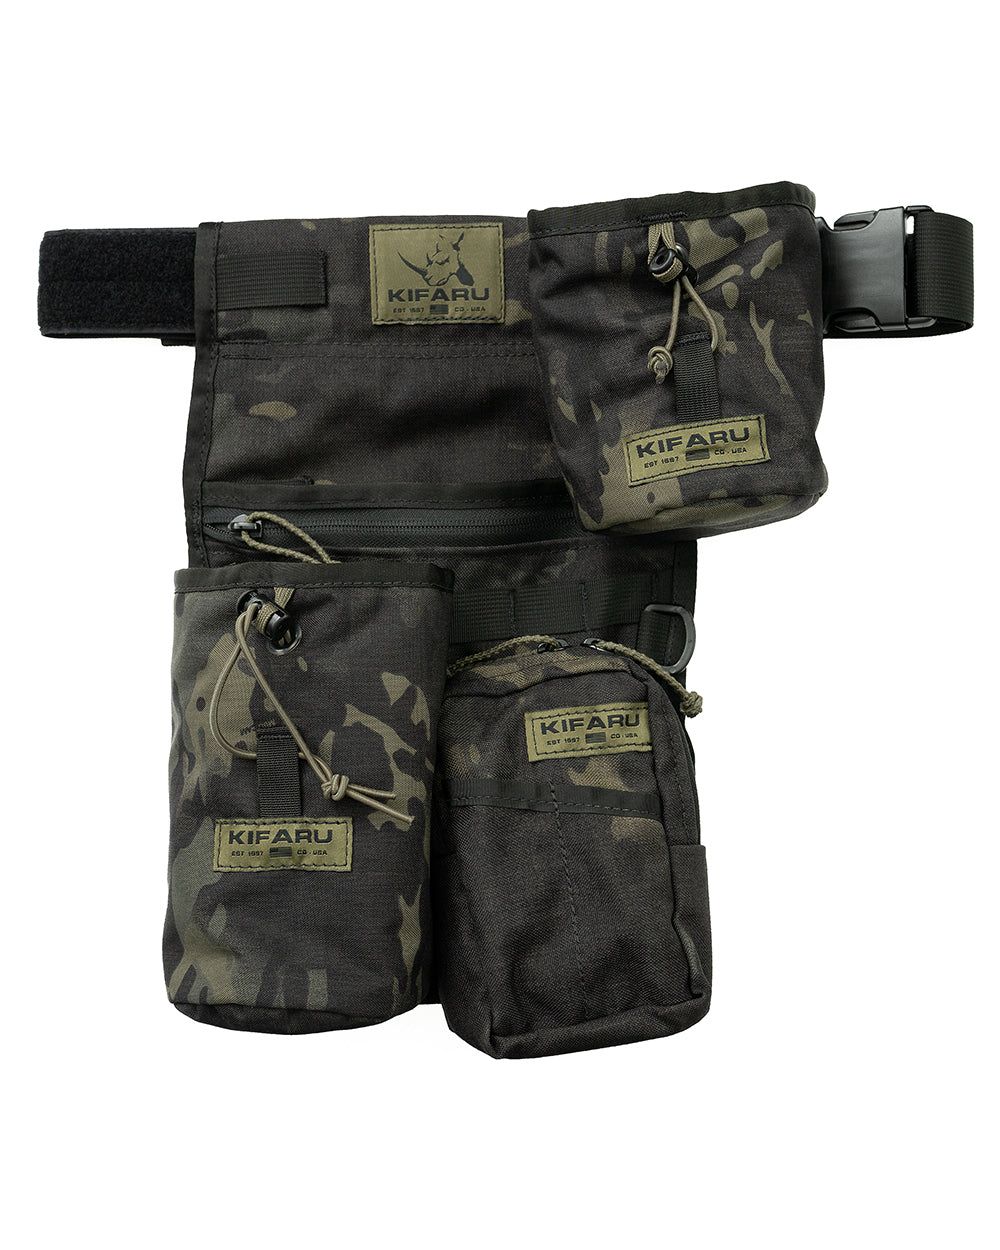 Cabela's Outdoor Gear hunting vest, Men's Fashion, Tops & Sets, Vests on  Carousell